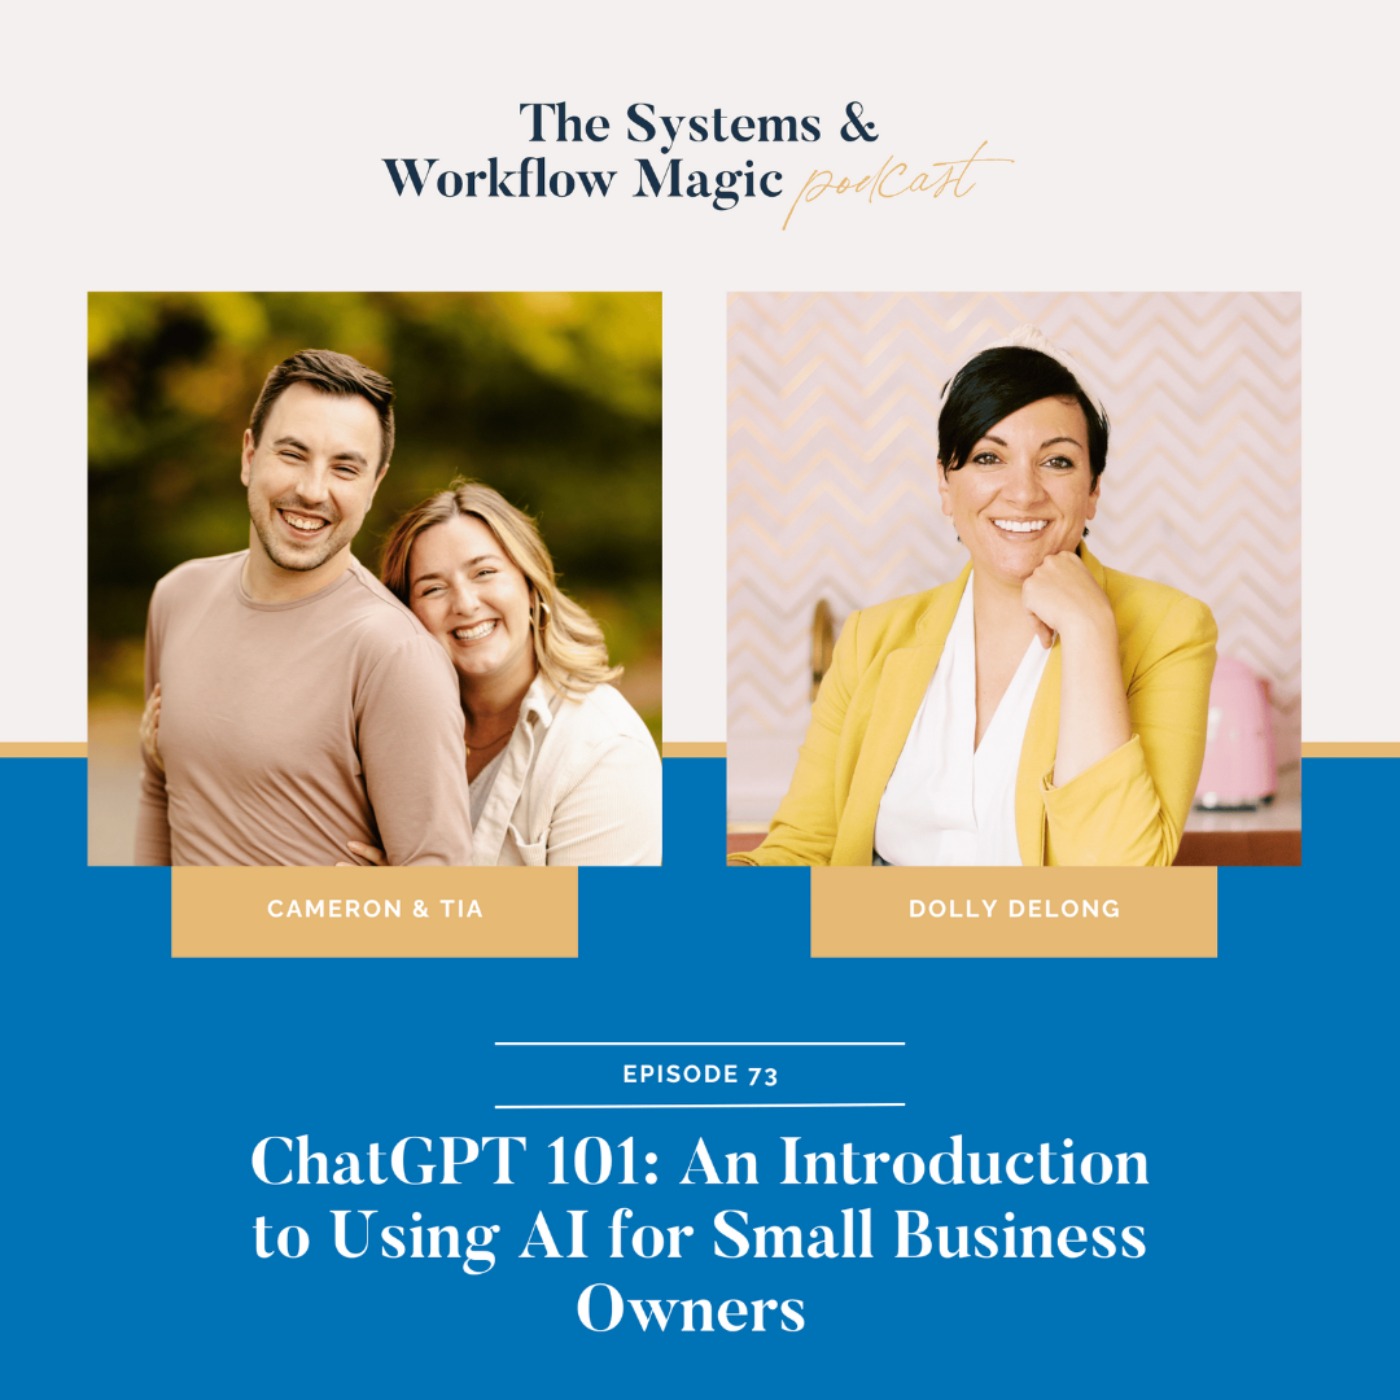 73: ChatGPT 101: An Introduction to Using AI for Small Business Owners featuring Cameron & Tia Goff